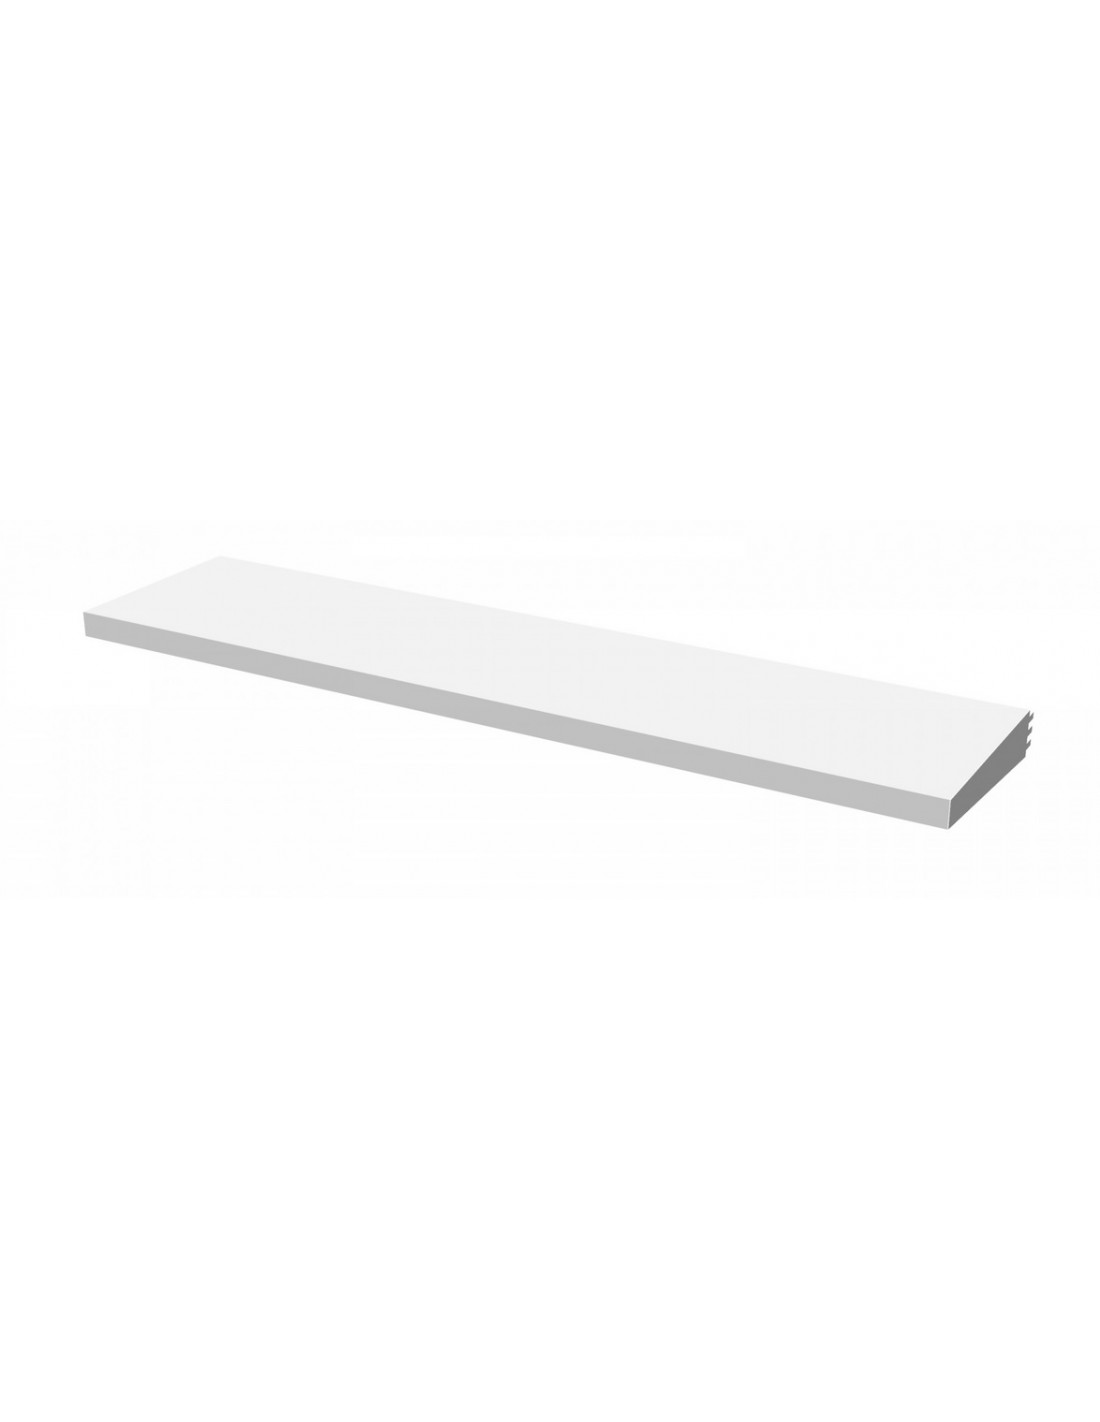 Additional shelf in 140 cm white painted sheet - For mod. VOLCANO 80